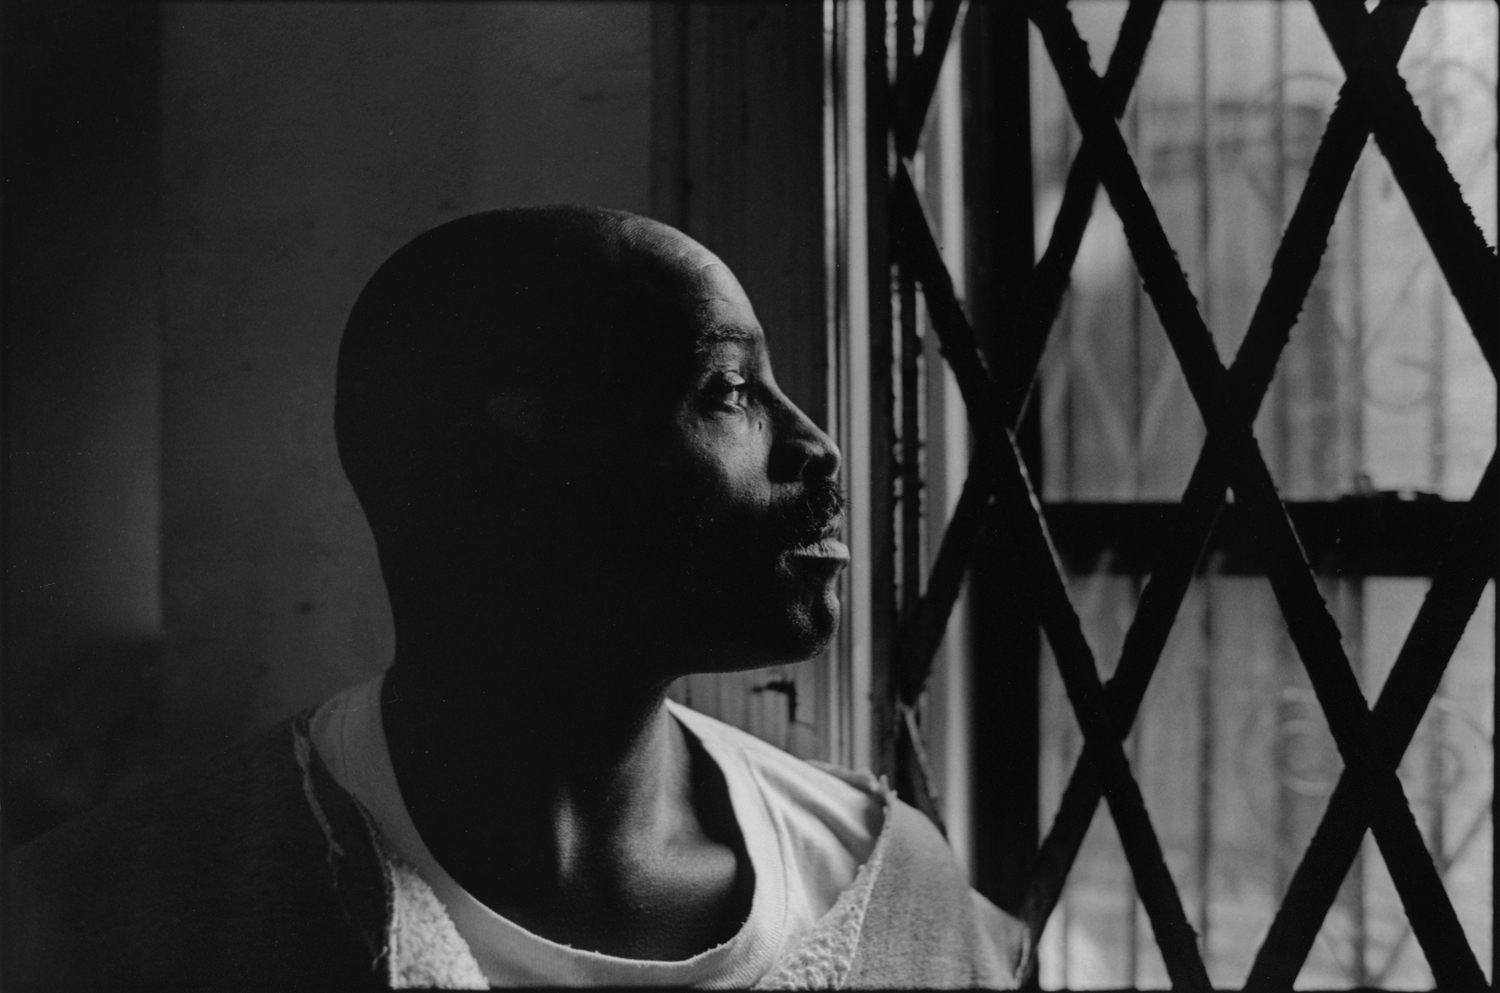 James looks out the front window of his apartment through the security grate on window. 1996. : Carmel Hill Harlem NYC 1995-2000 : BILL FOLEY 